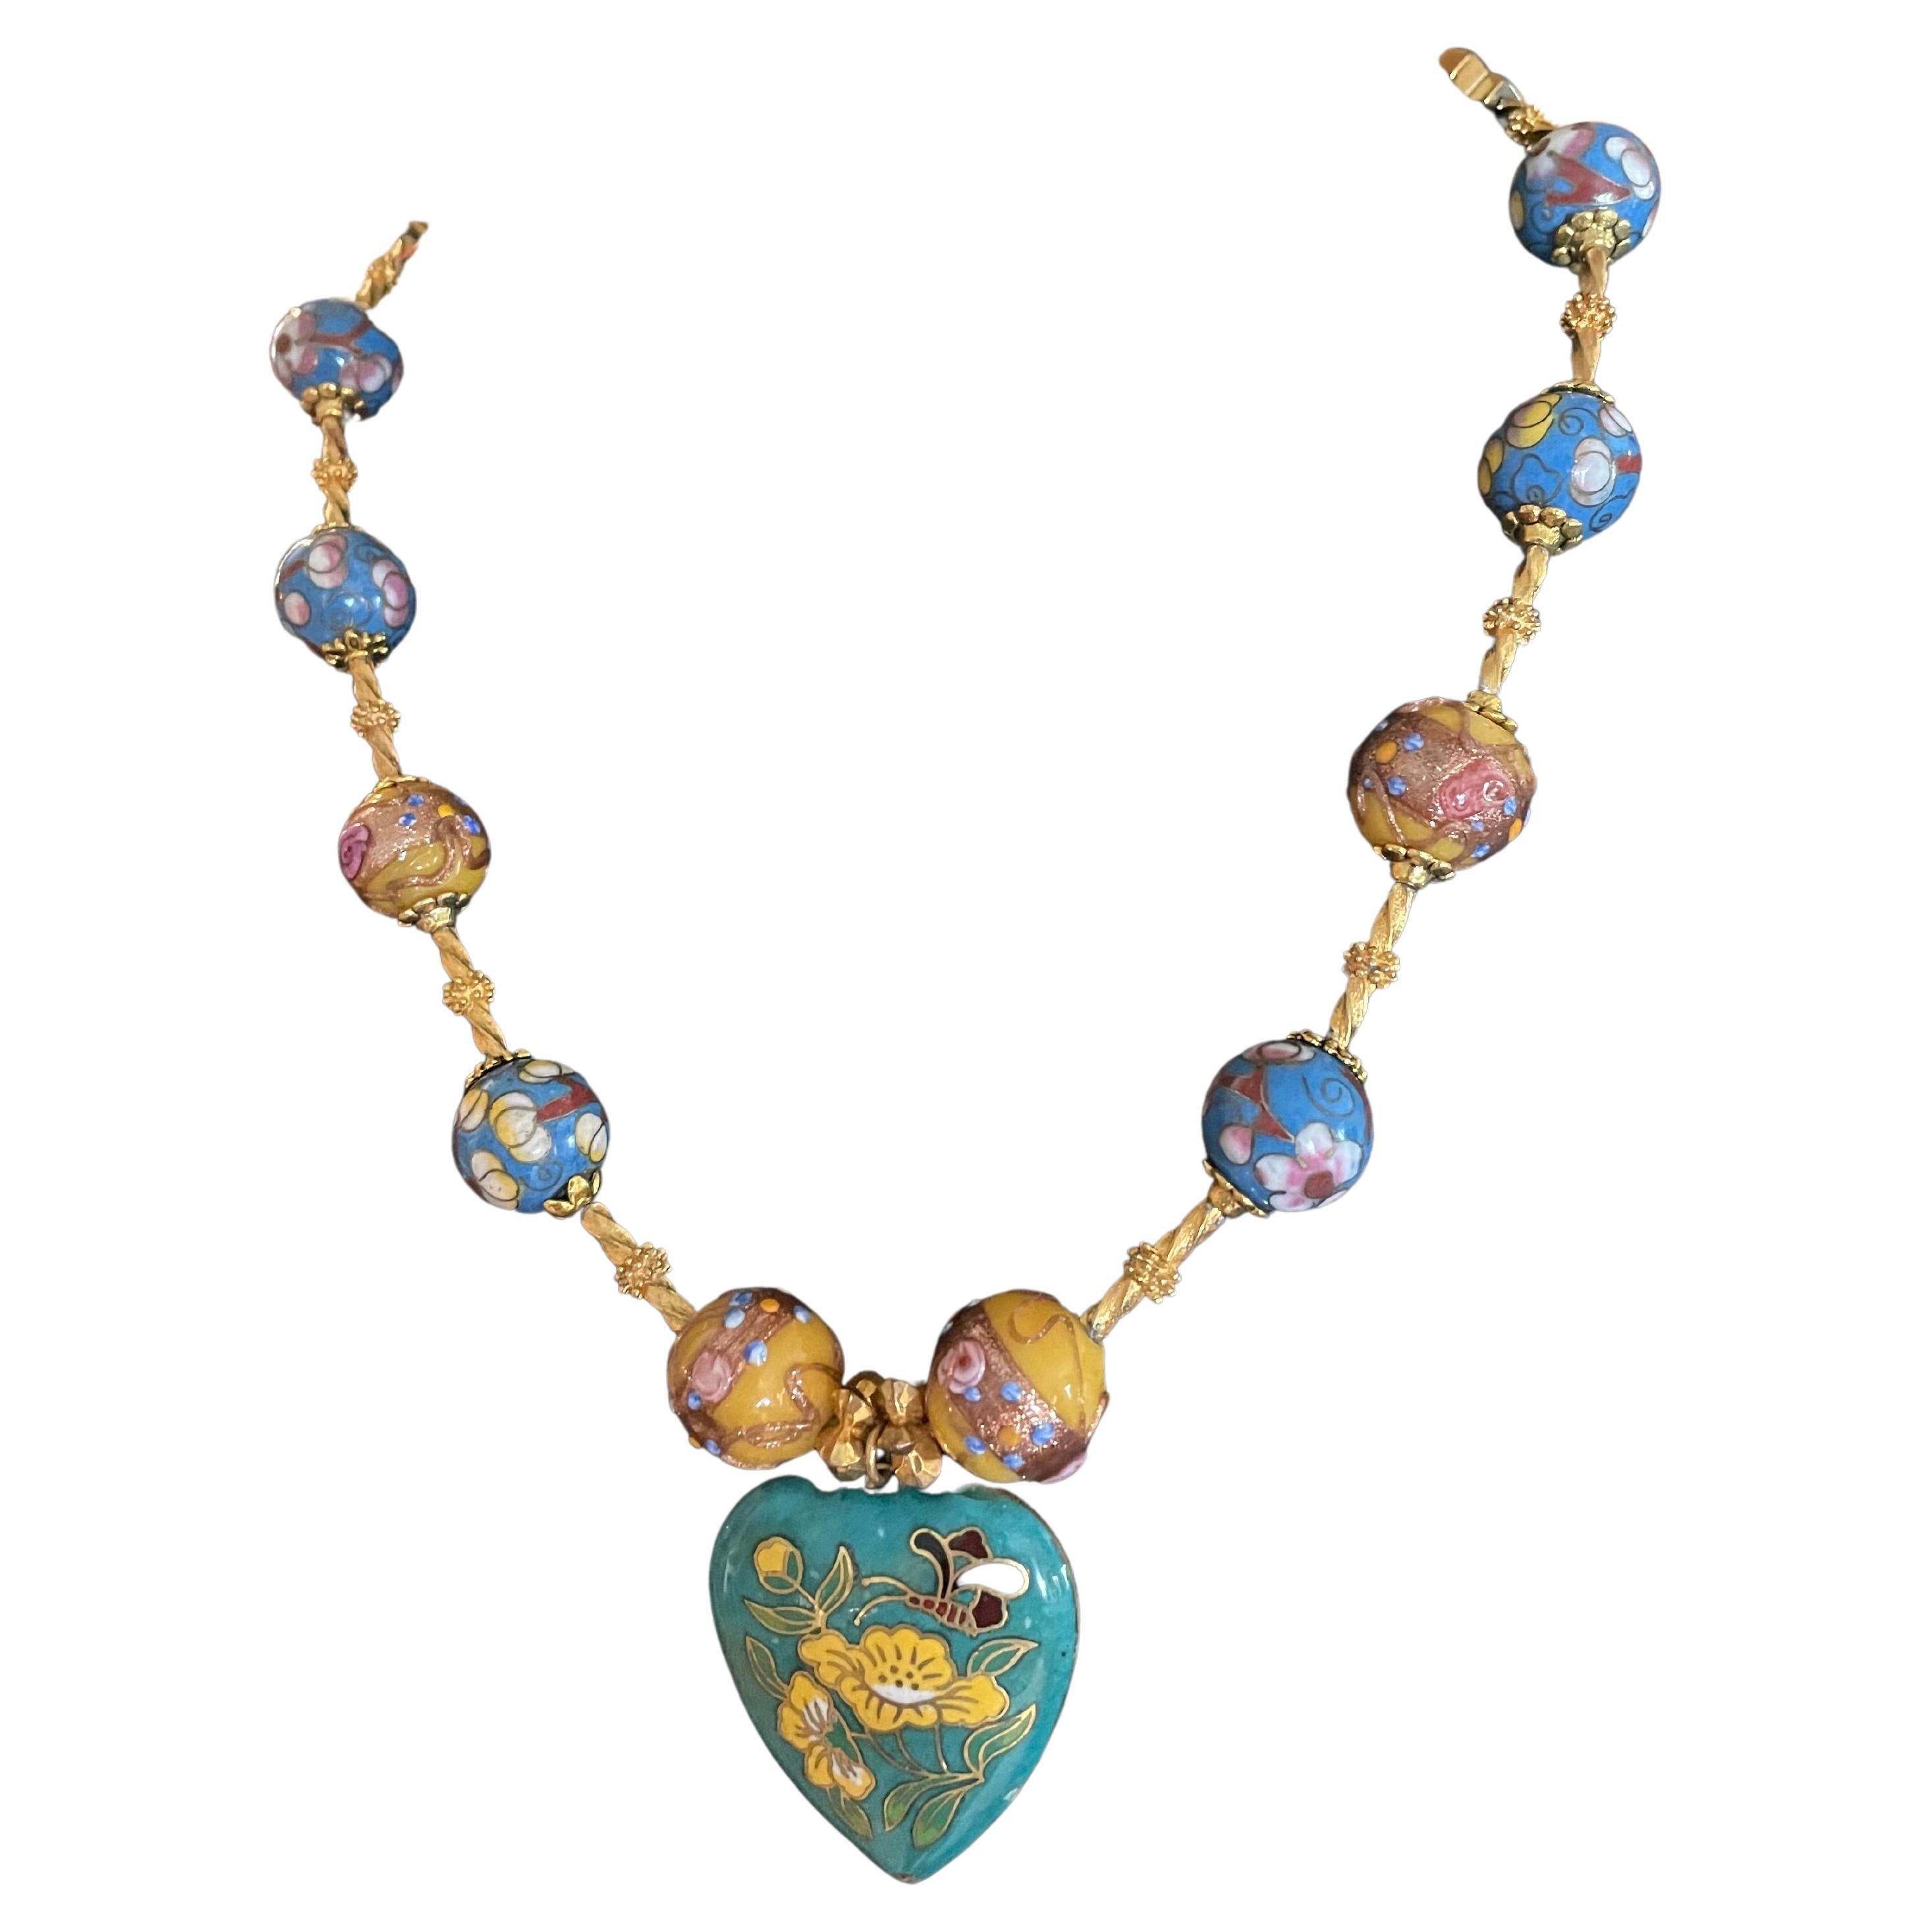 LB vintage Chinese cloisonné heart necklace with Vintage Venetian wedding beads For Sale